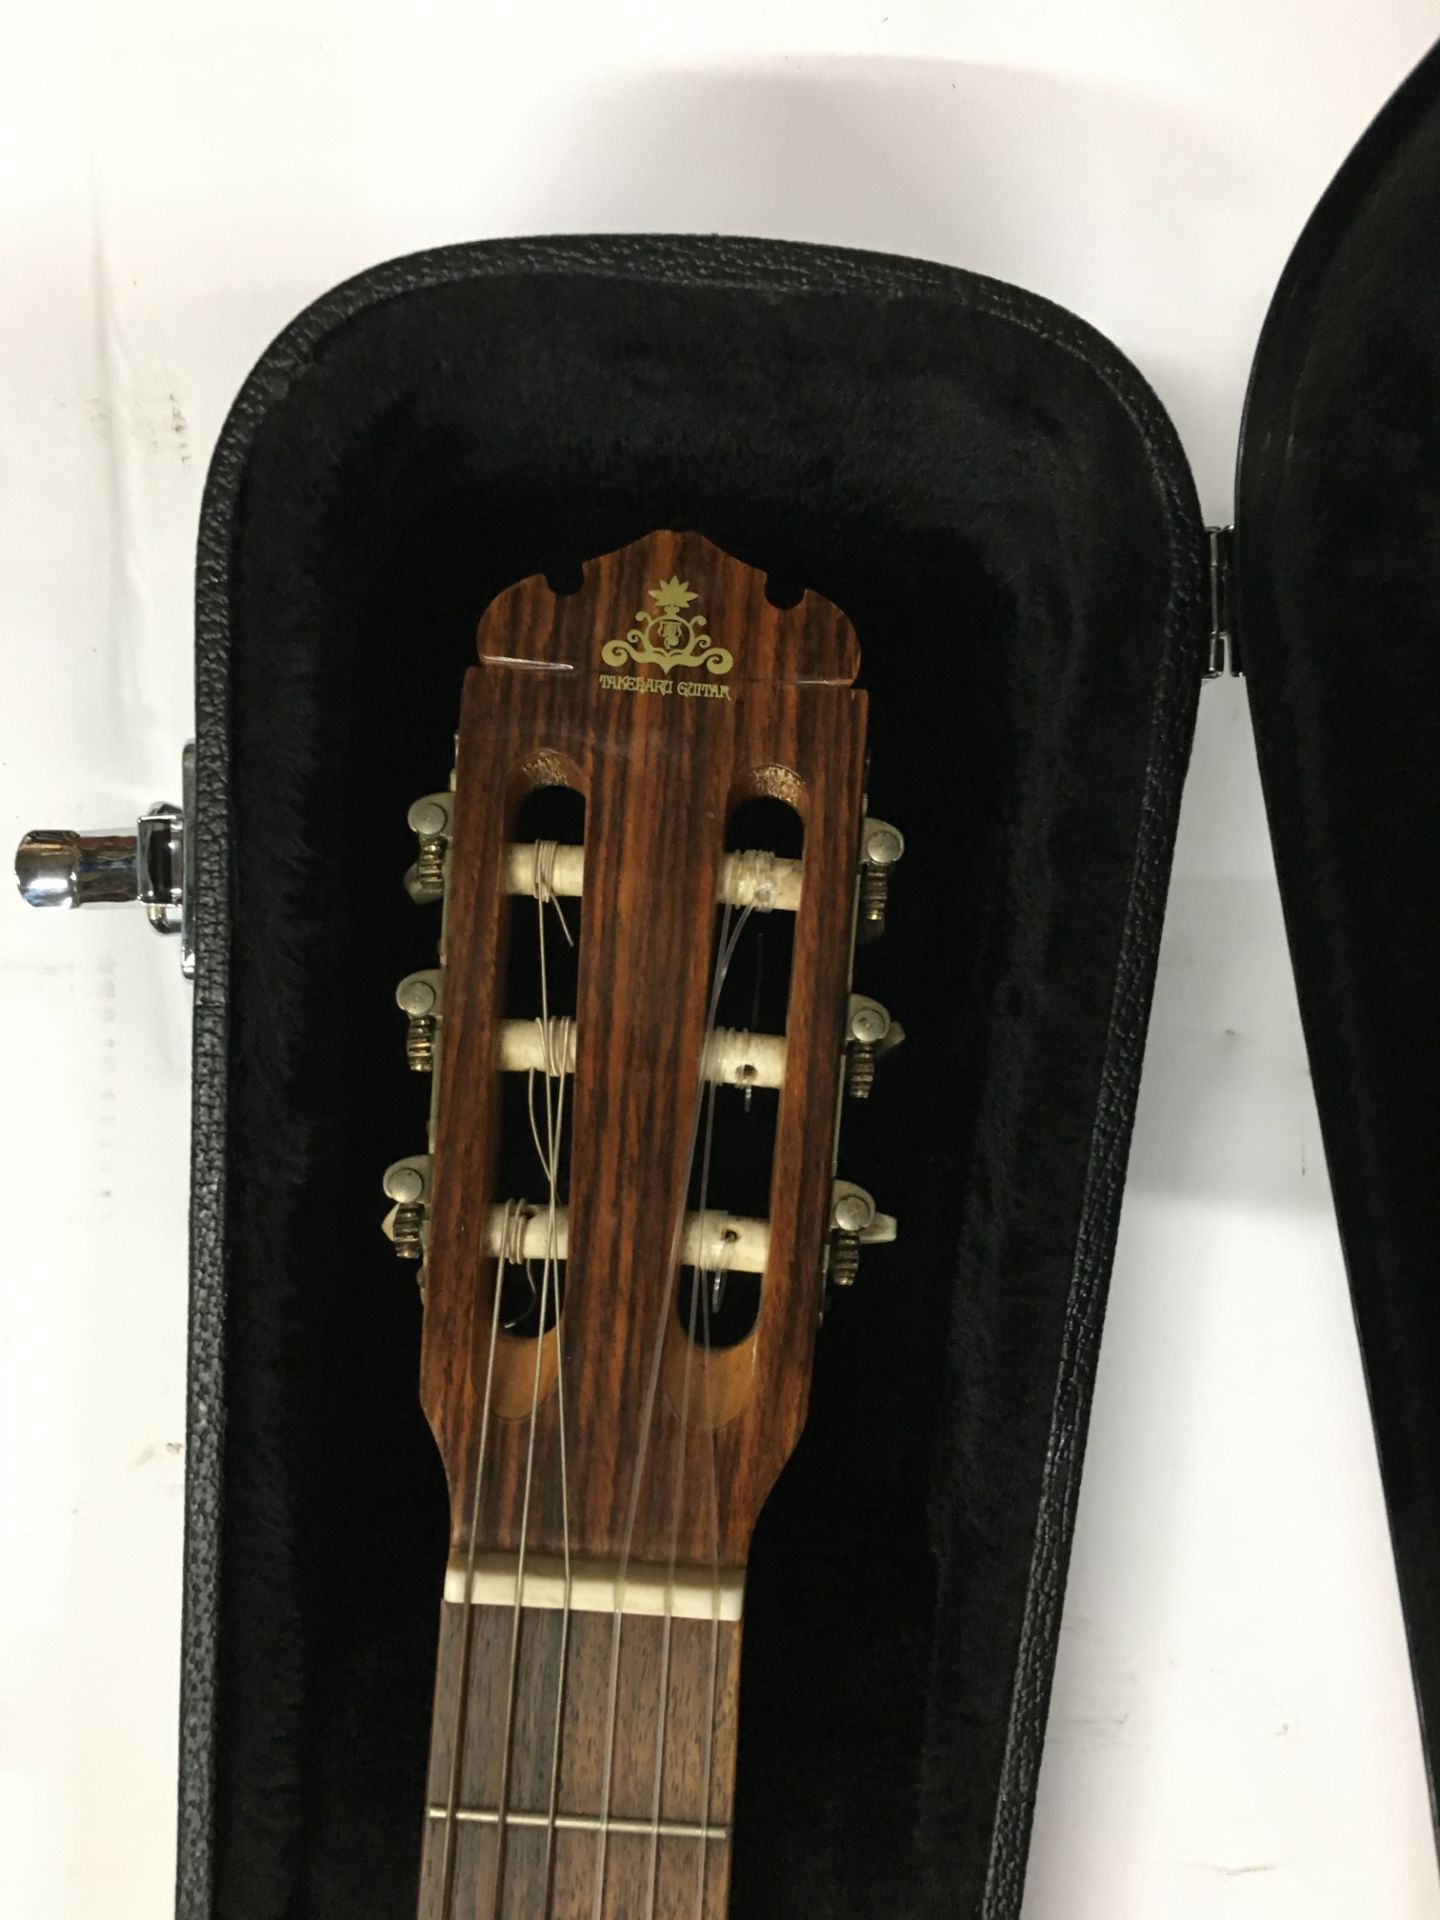 Takearu Acoustic Guitar | In Case | No RRP - Image 3 of 3